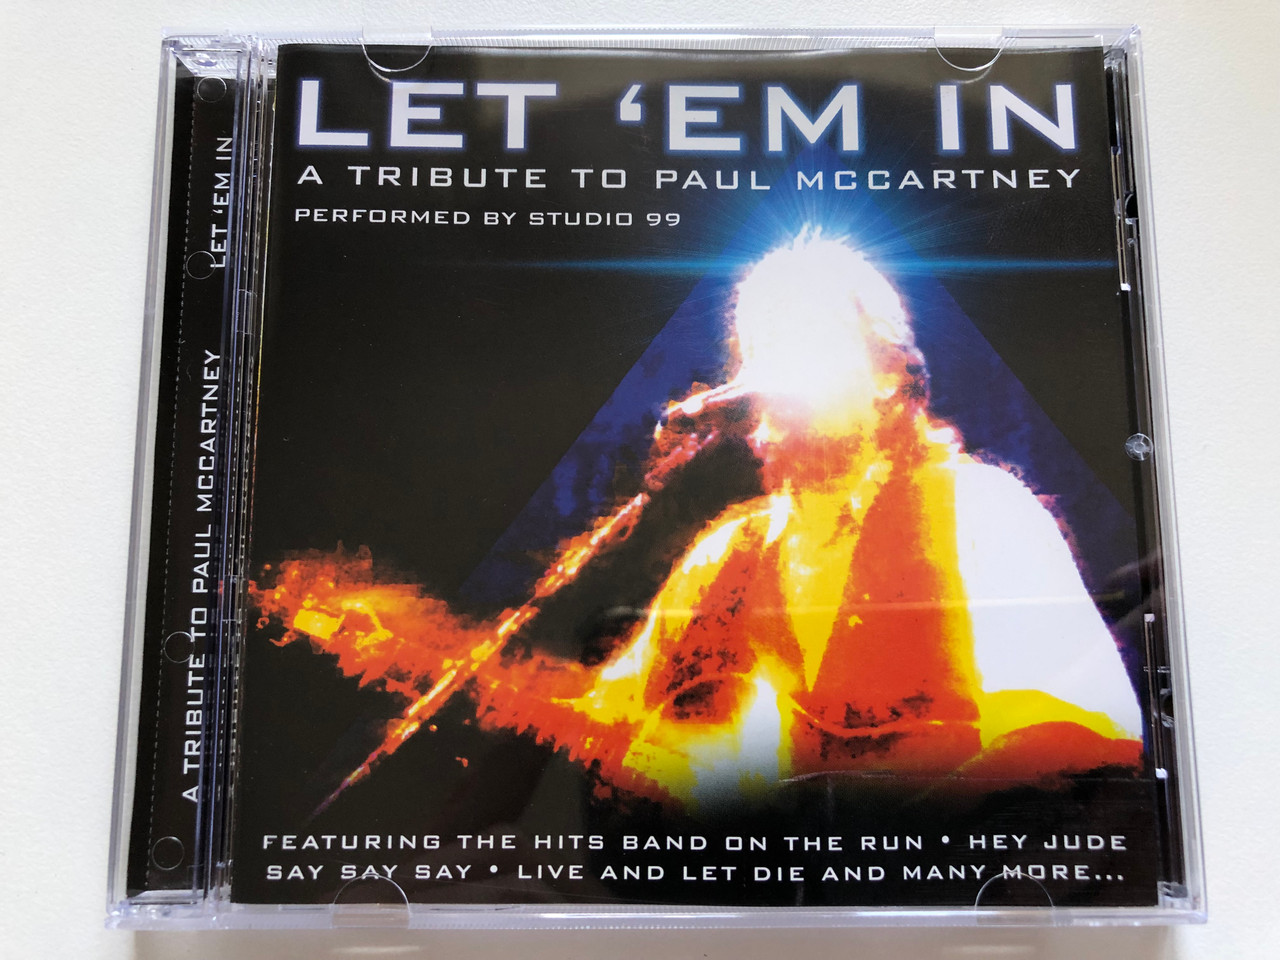 https://cdn10.bigcommerce.com/s-62bdpkt7pb/products/0/images/242659/Let_em_In_-_A_Tribute_To_Paul_McCartney_-_Performed_by_Studio_99_Featuring_The_Hits_Band_On_The_Run_Hey_Jude_Say_Say_Say_Live_And_Let_Die_And_Many_More..._Going_For_A_Song_Audio_CD_GF_1__15820.1658820287.1280.1280.JPG?c=2&_gl=1*1xemud8*_ga*MjA2NTIxMjE2MC4xNTkwNTEyNTMy*_ga_WS2VZYPC6G*MTY1ODgxMTM2Mi40OTcuMS4xNjU4ODE5OTE3LjQw